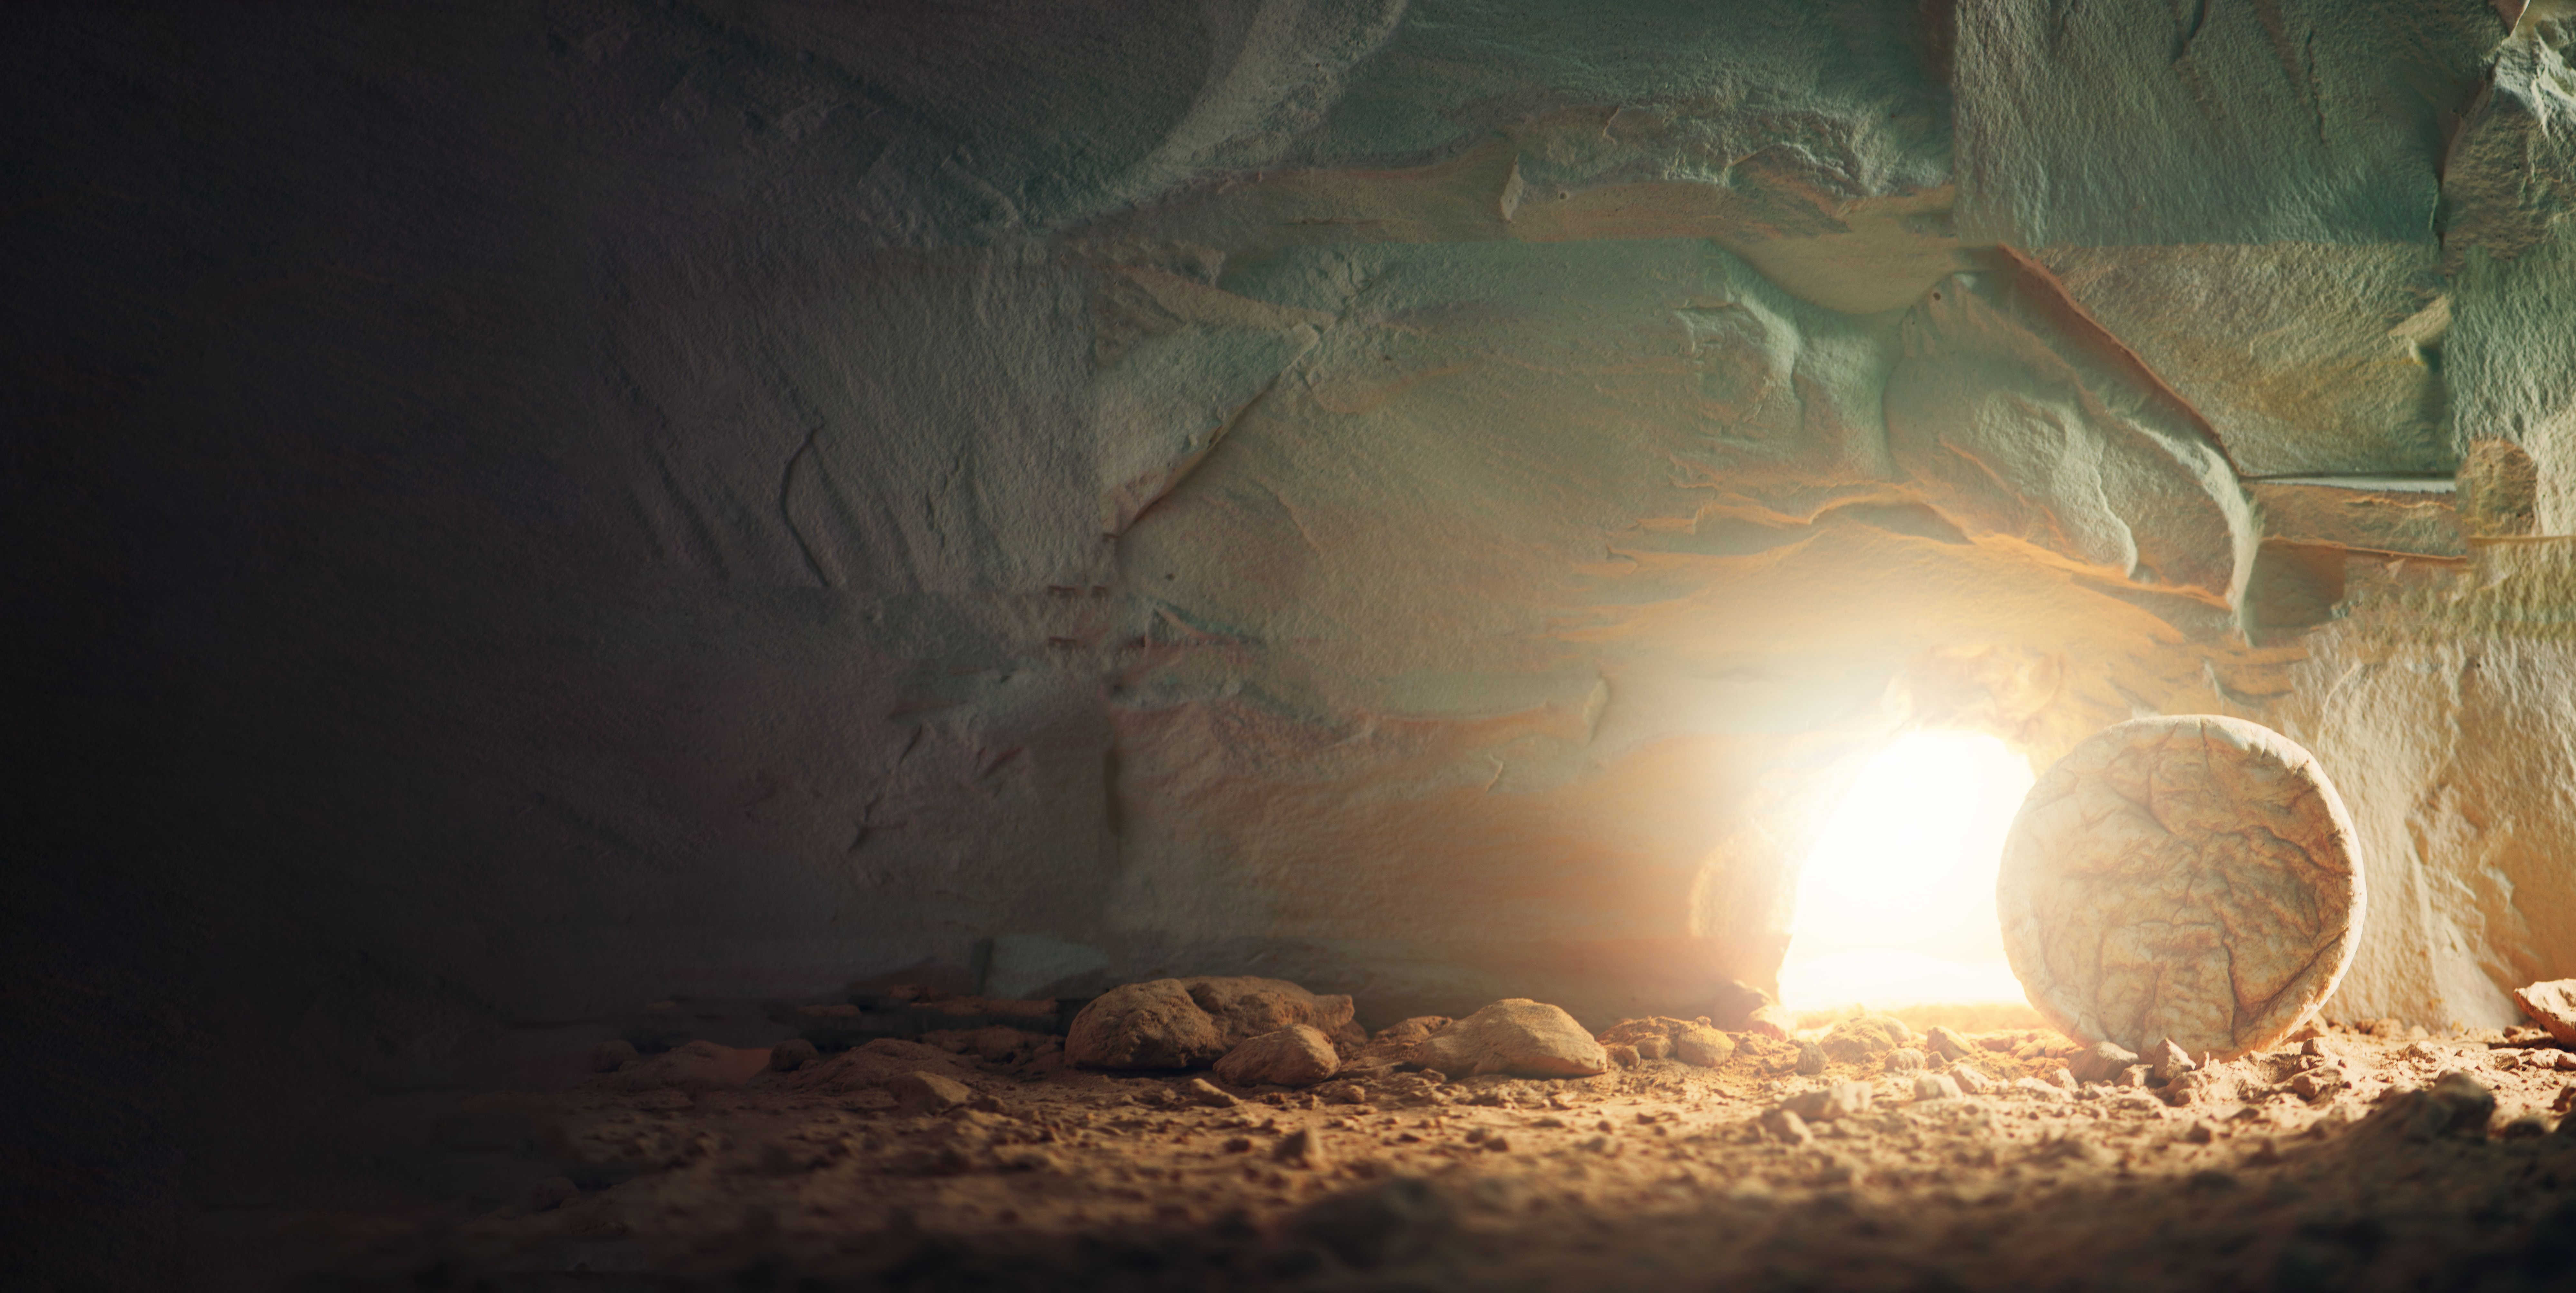 Light shining out of an empty tomb